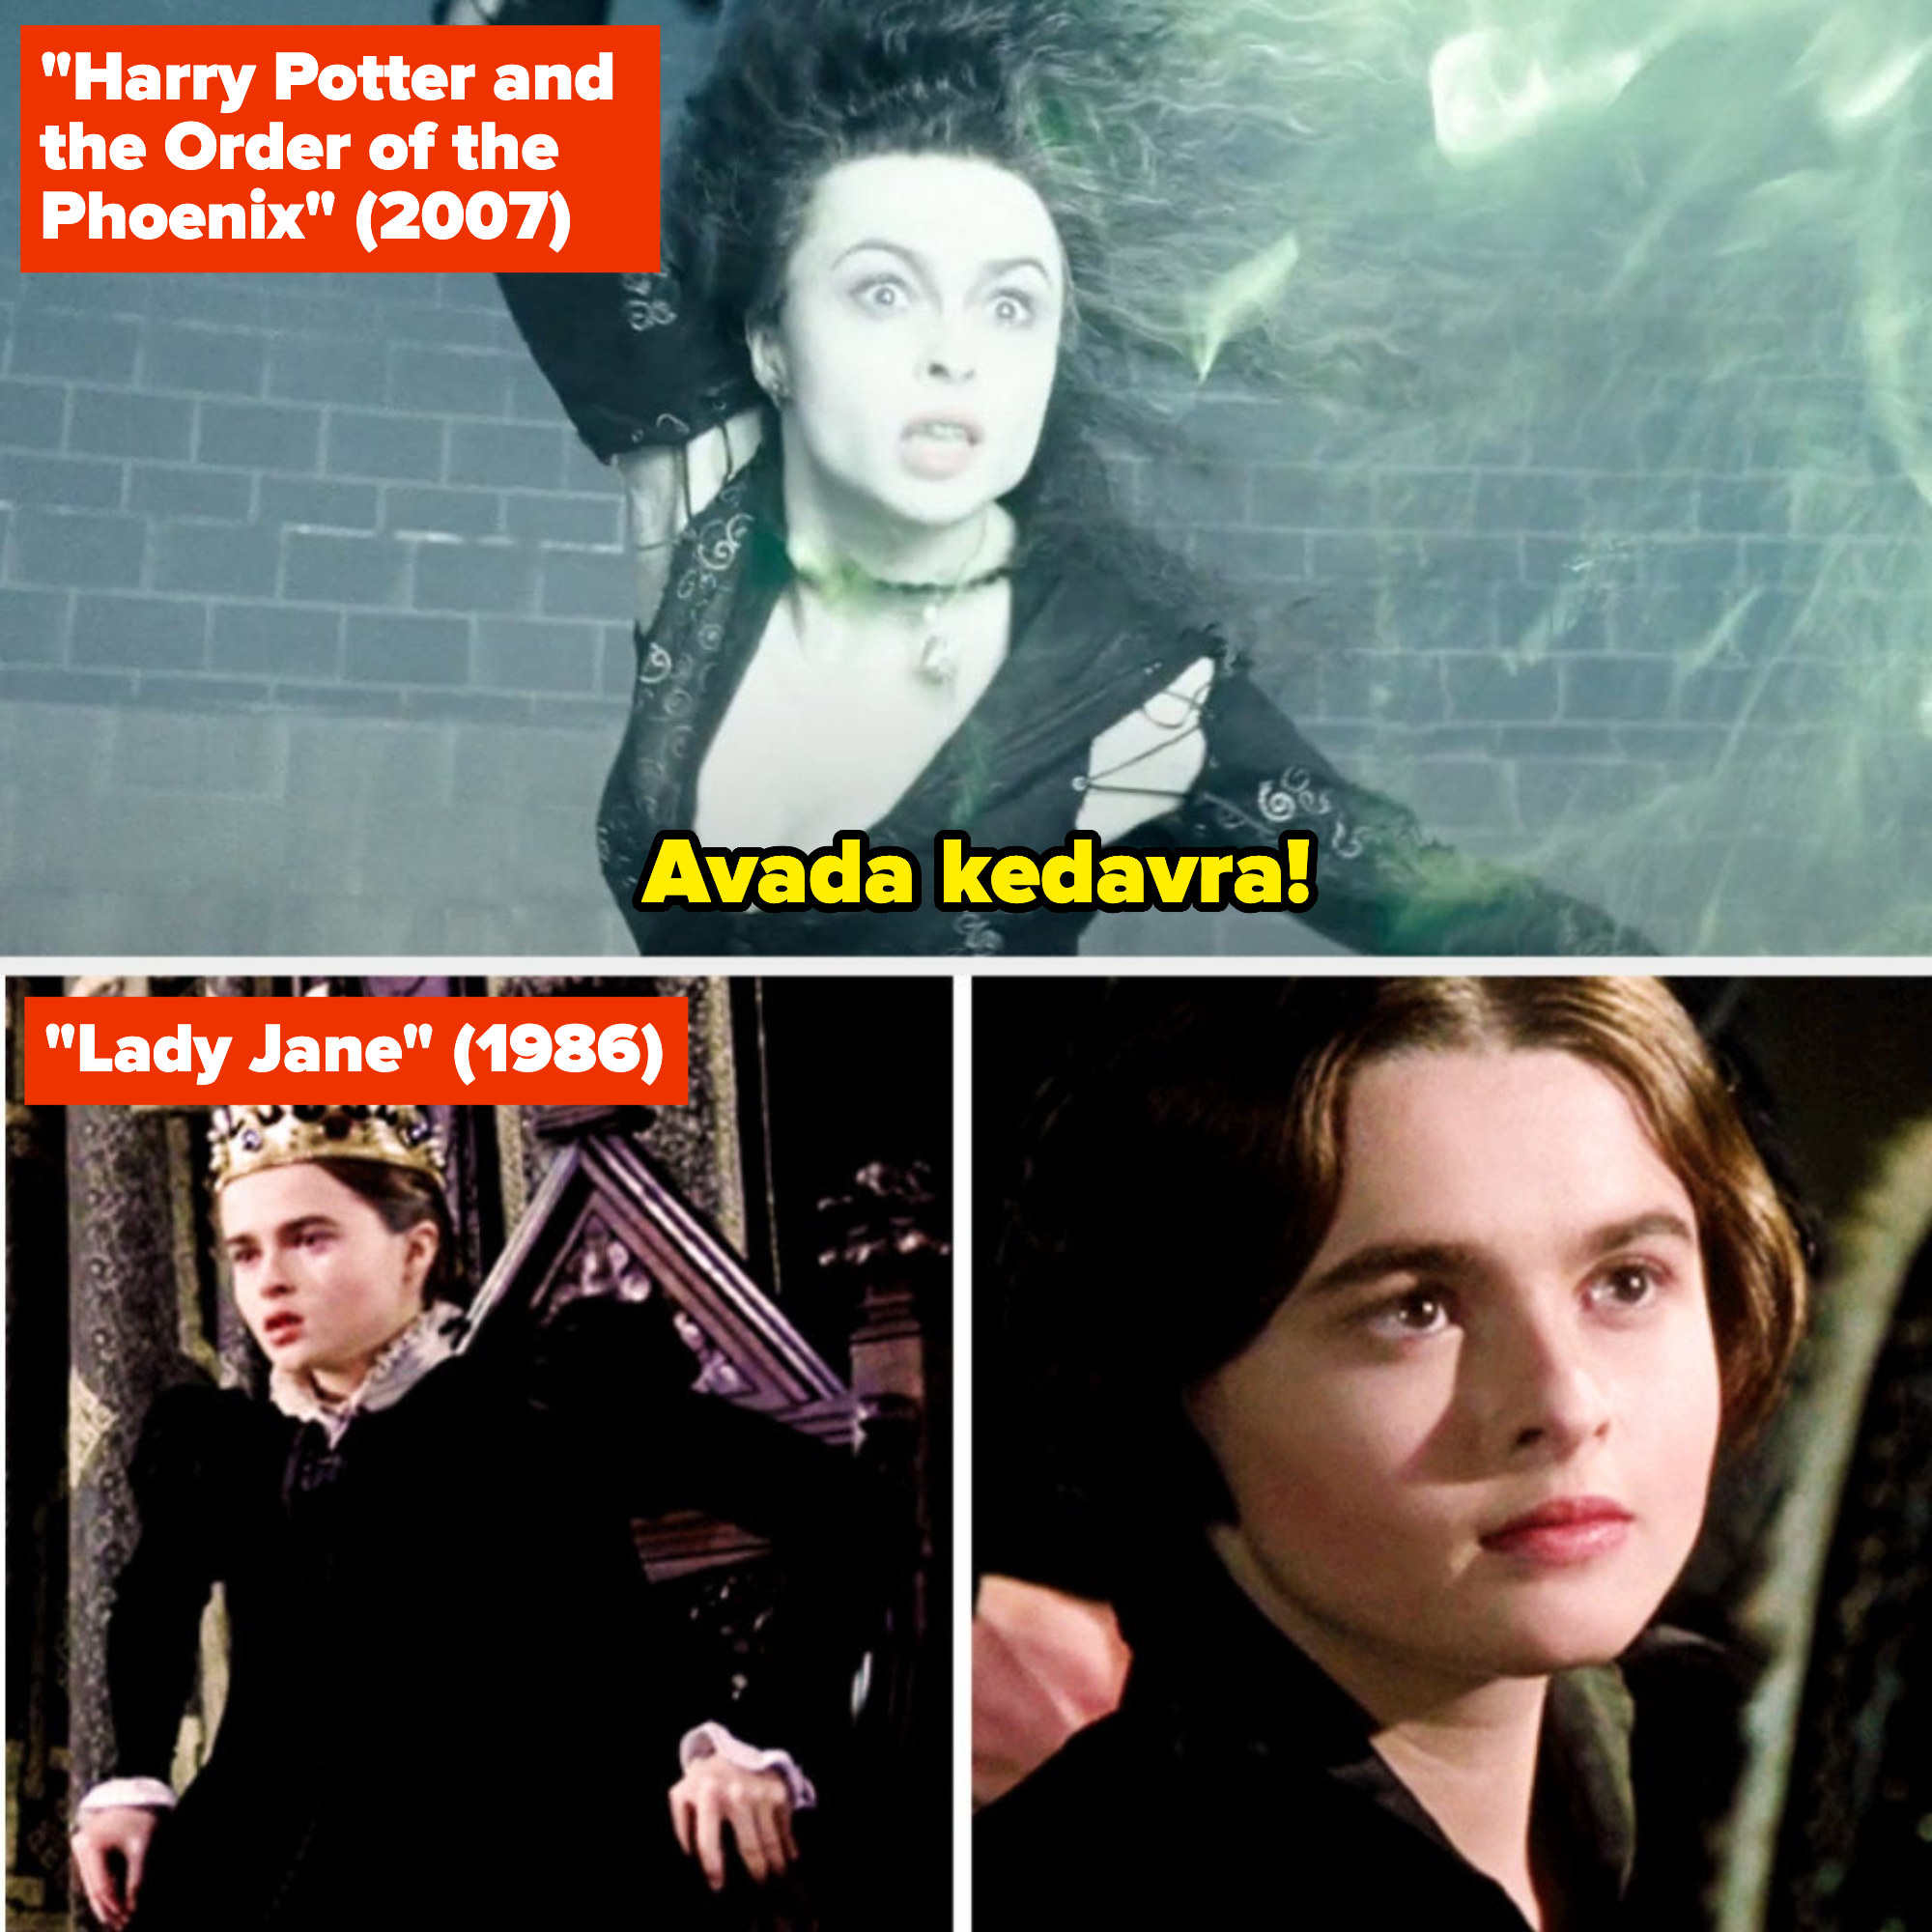 Helena Bonham Carter in &quot;Harry Potter and the Order of the Phoenix&quot; and &quot;Lady Jane&quot;